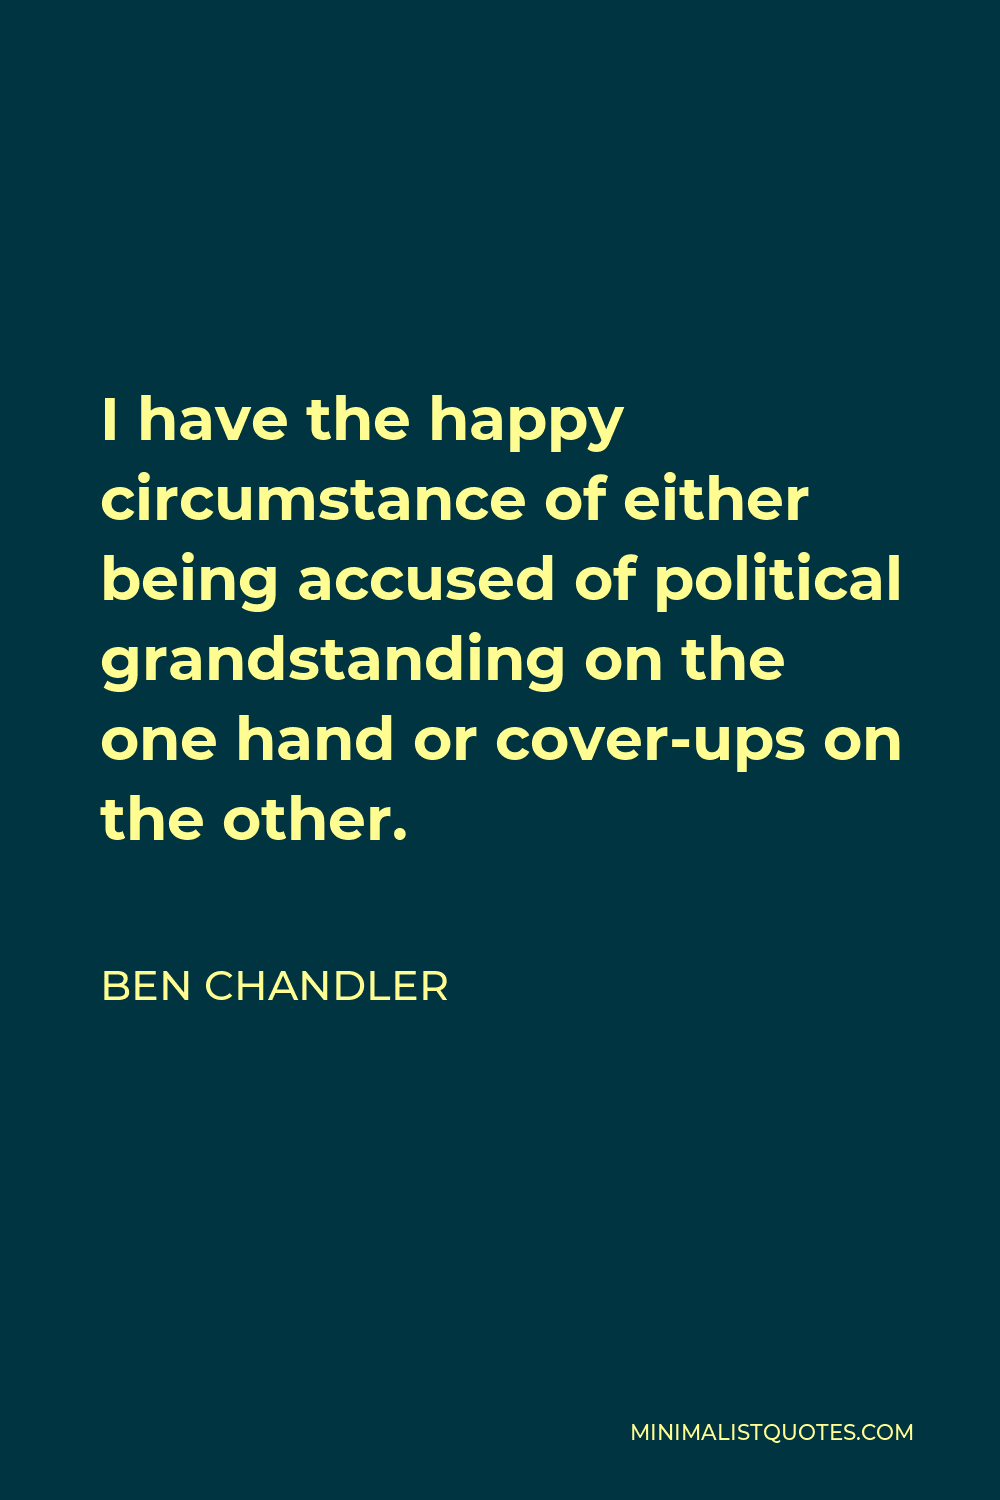 Ben Chandler Quote - I have the happy circumstance of either being accused of political grandstanding on the one hand or cover-ups on the other.